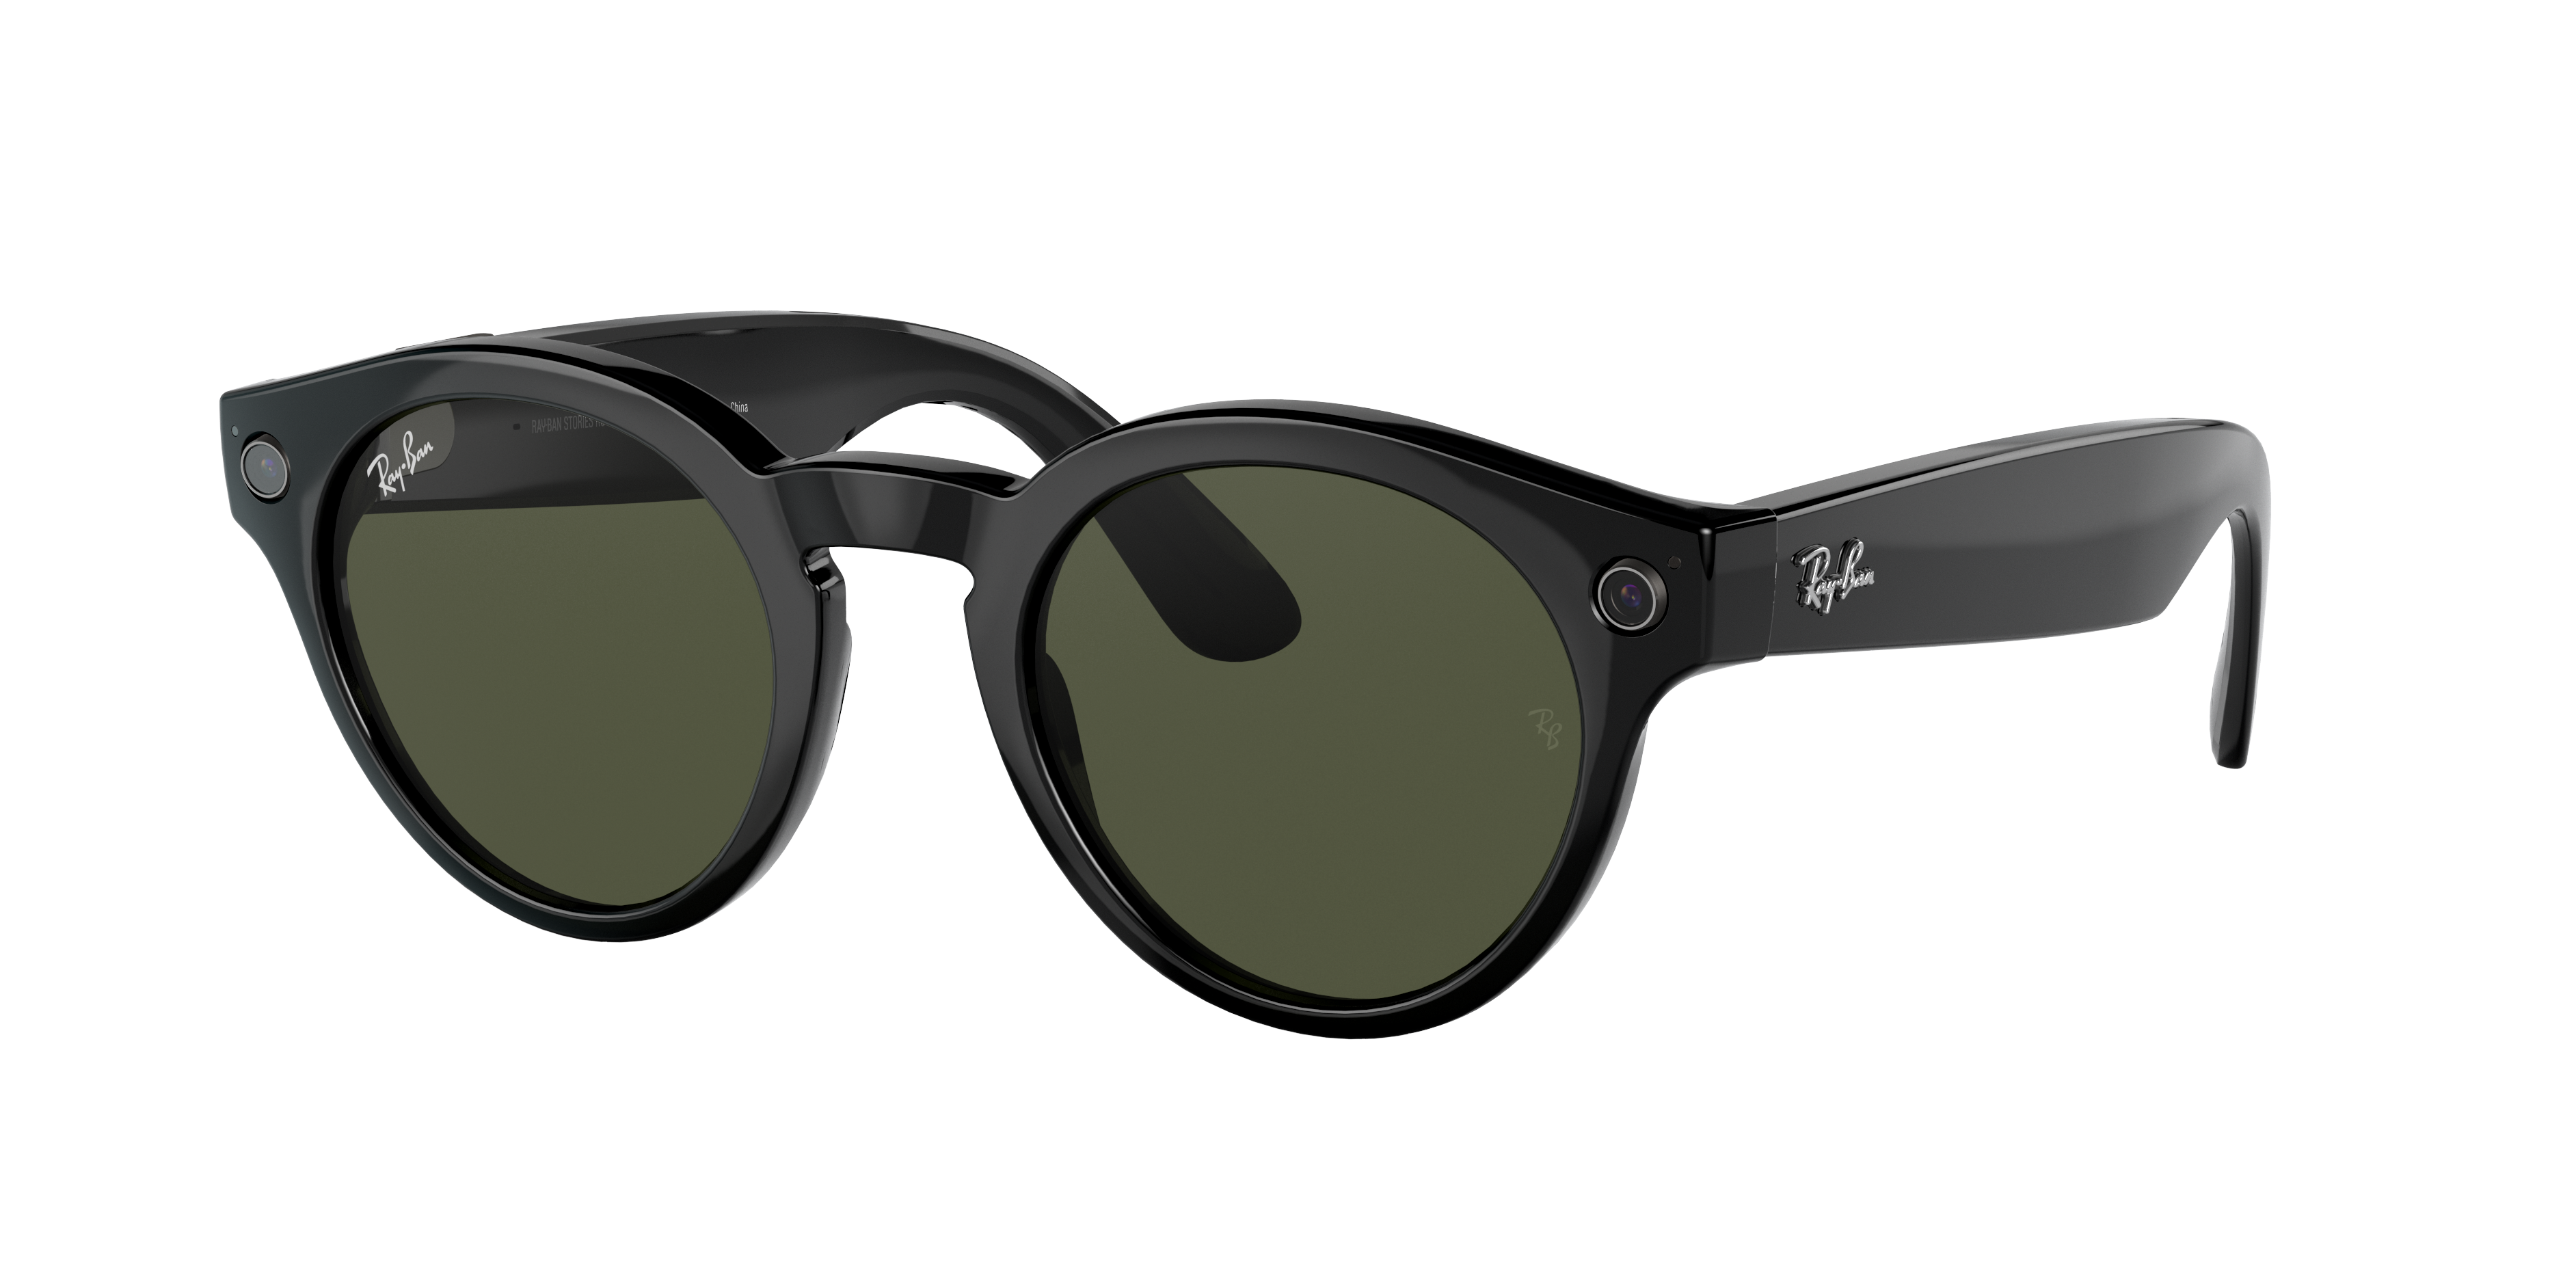 Ray-ban Stories | Round Sunglasses in Shiny Black and Green | Ray-Ban®